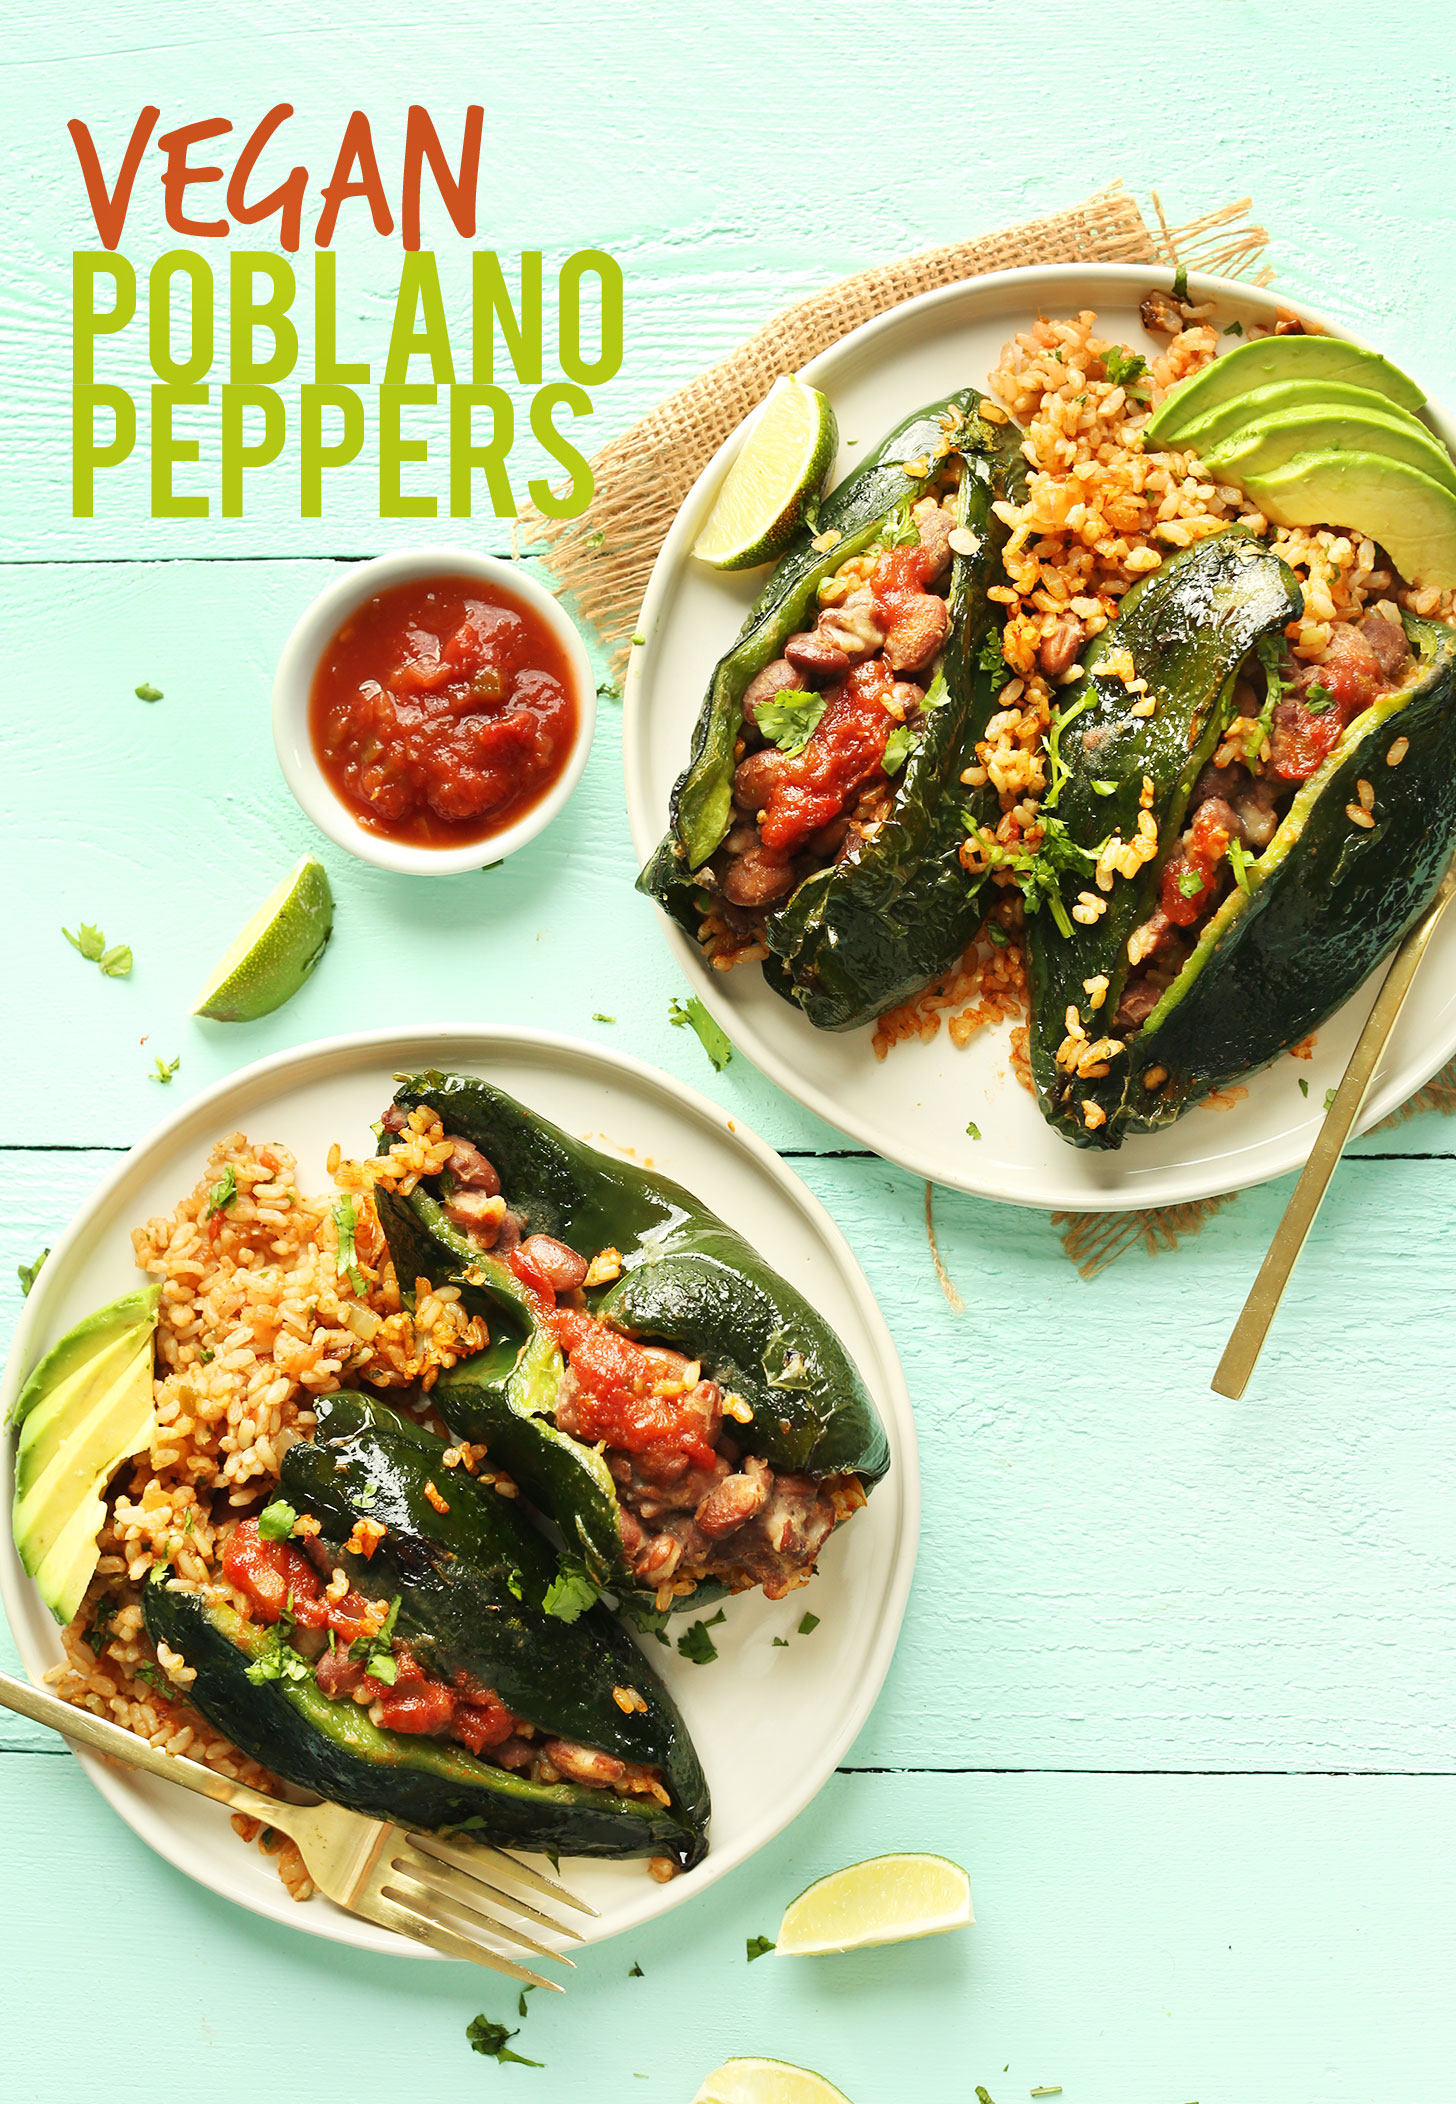 Plates of Vegan Stuffed Poblano Peppers with garnishes of lime, avocado, and salsa